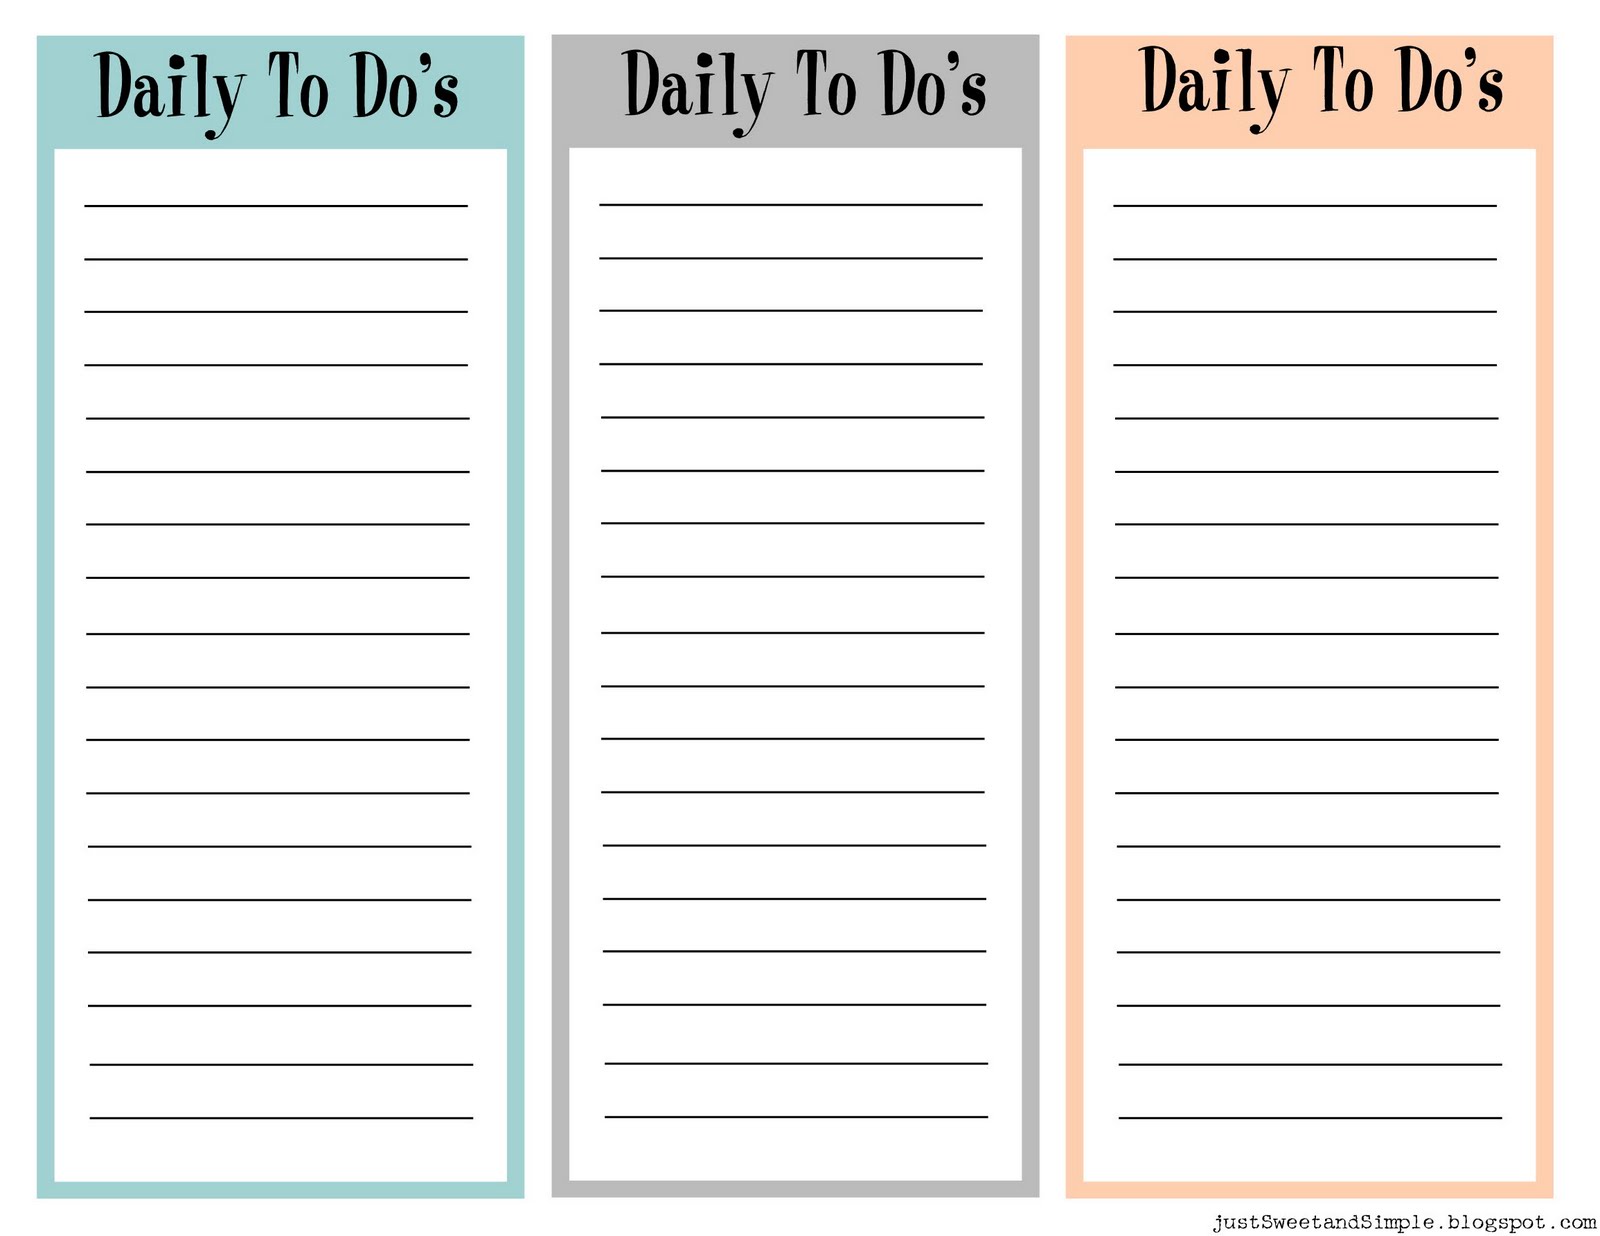 just Sweet and Simple: Printable: Little Daily To Do List's